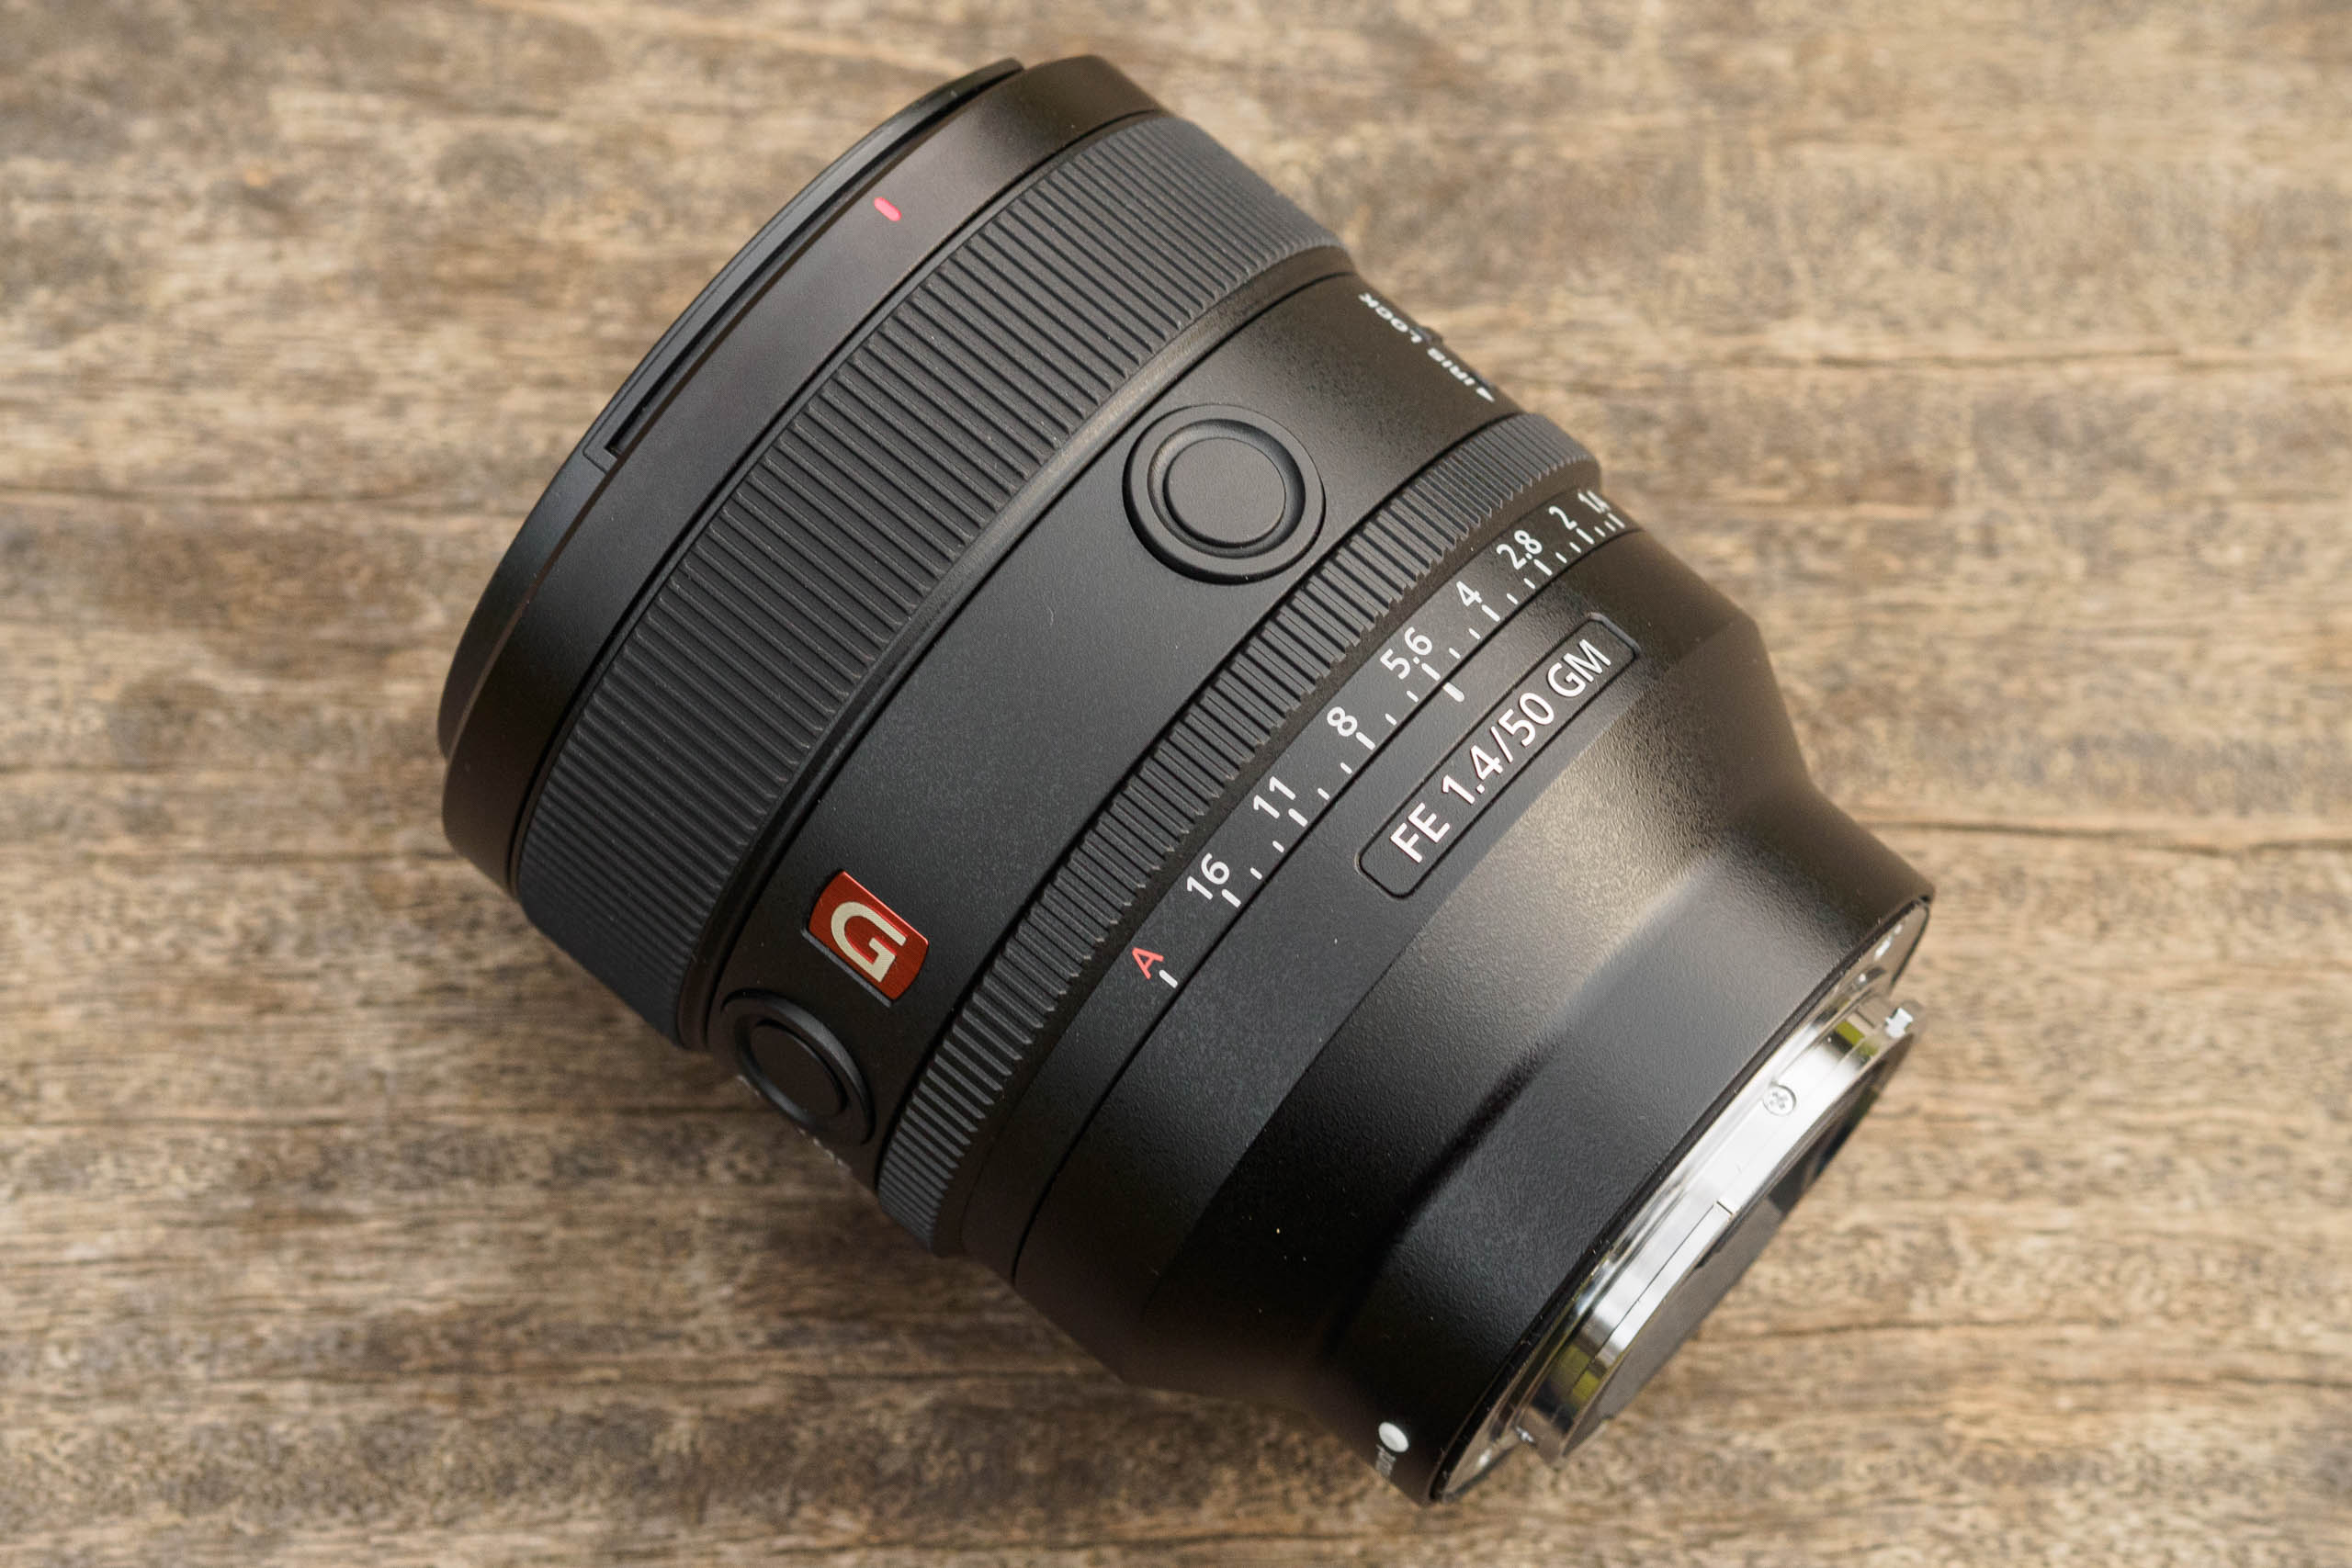 New Sony FE 50mm F1.4 GM vs 50mm F1.2 GM ve Zeiss 50mm F1.4 vs Sigma 50mm  F1.4 Art Size and Feature Comparison